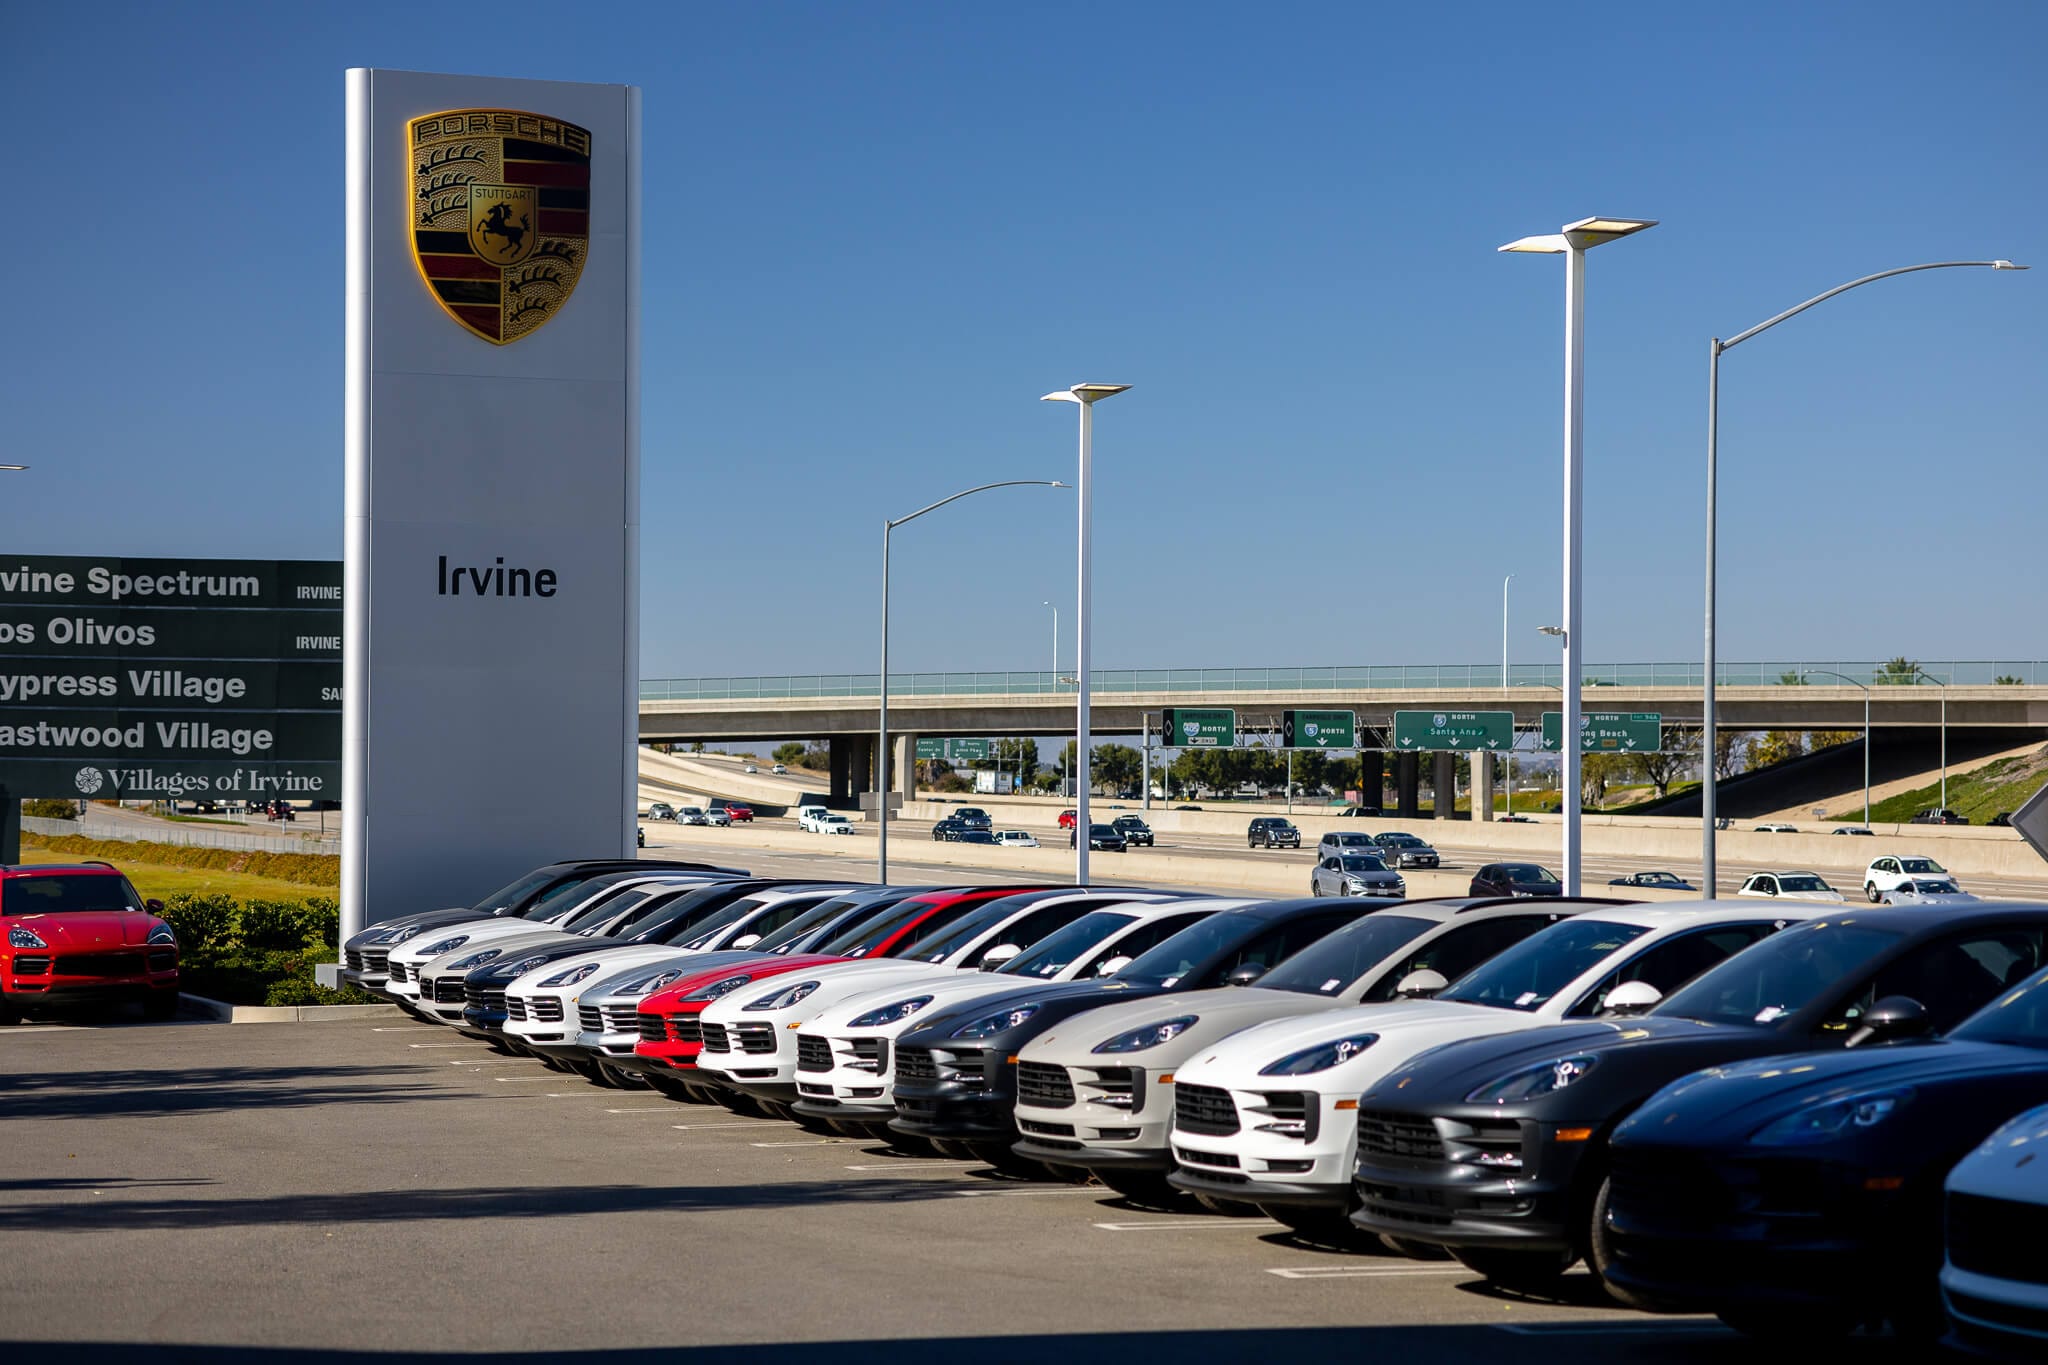 View of the well-stocked, well-lit car lot at Porsche Irvine